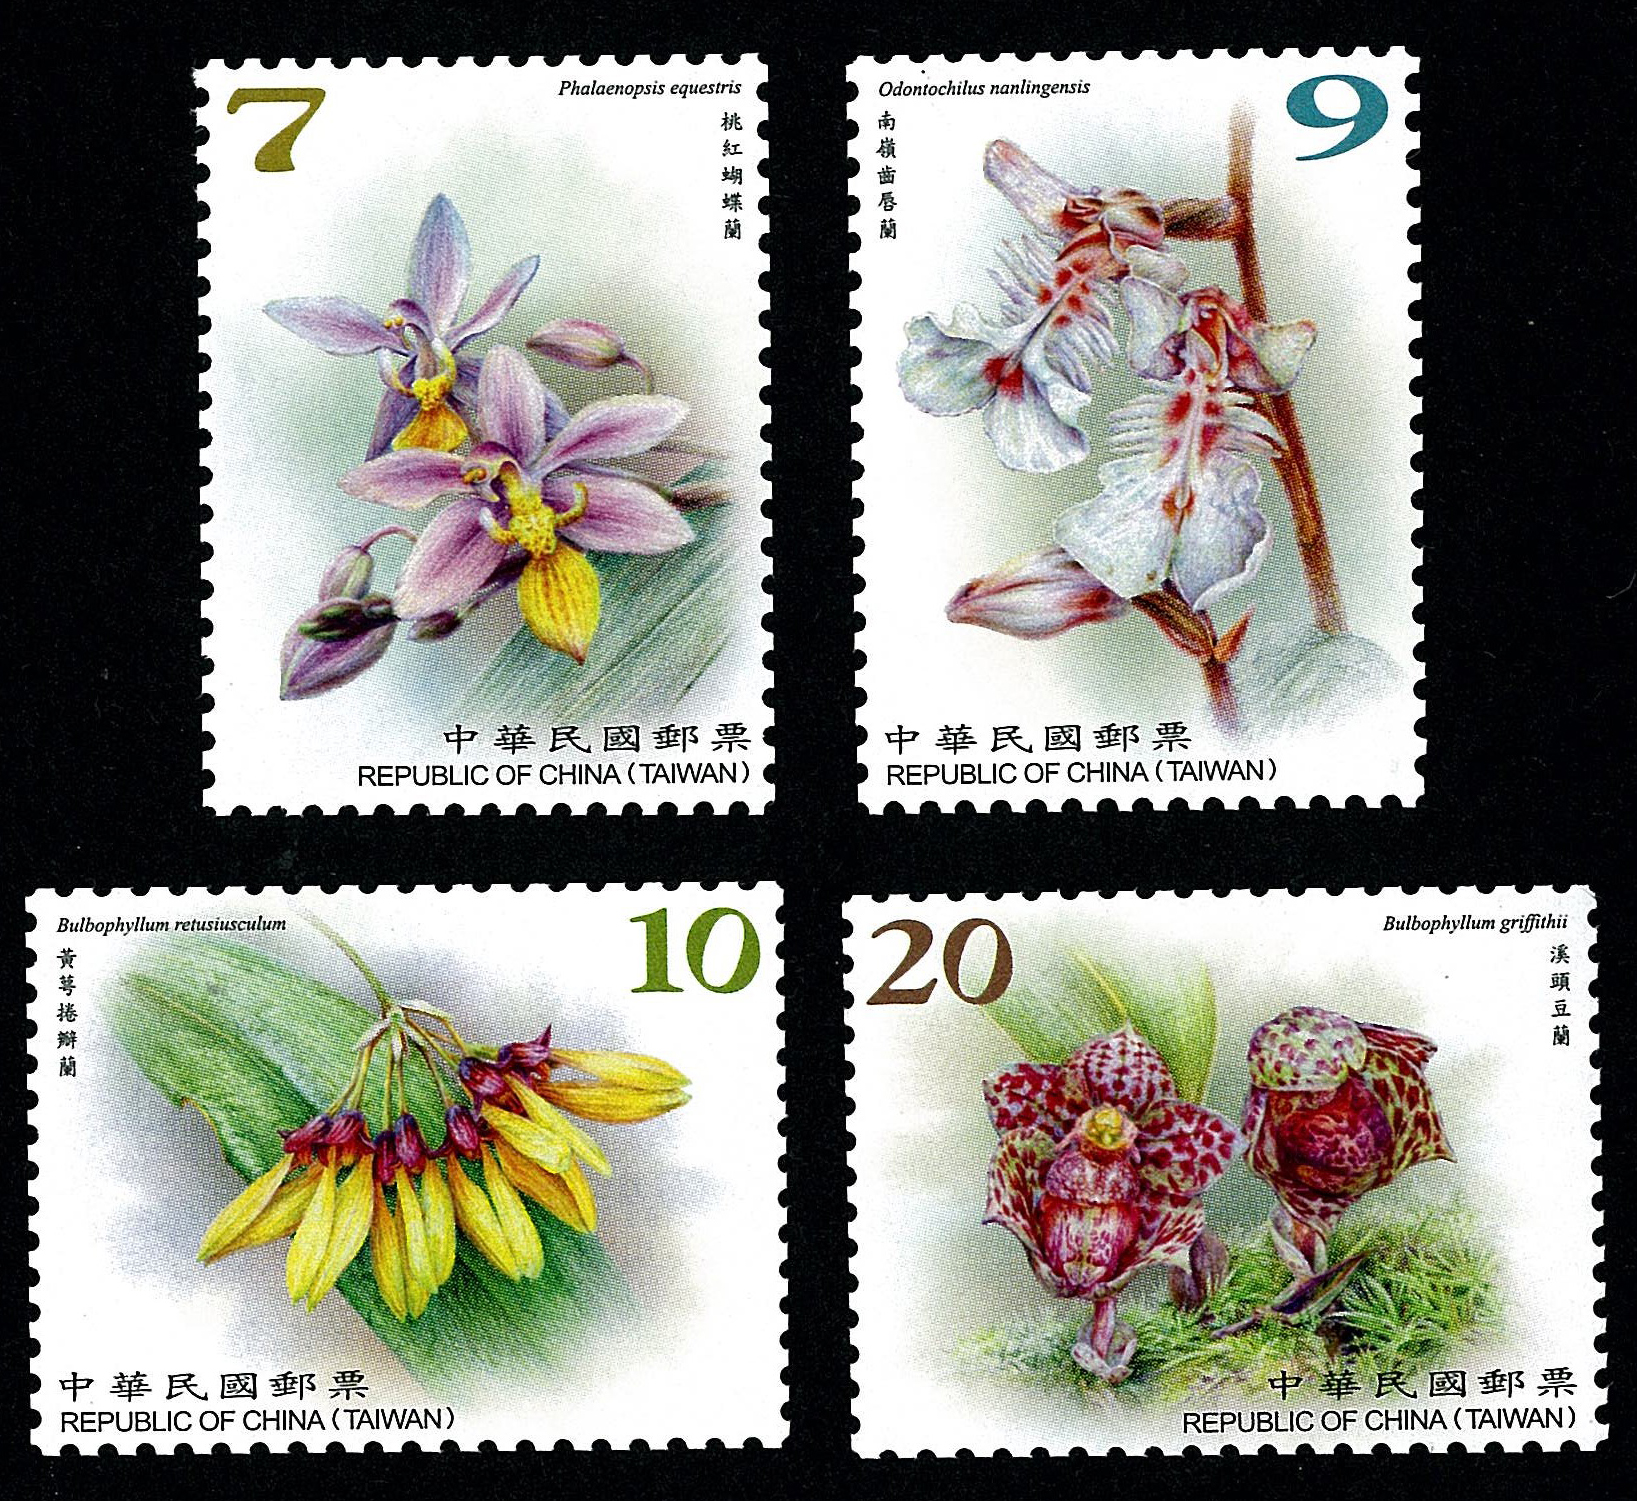 Wild Orchids of Taiwan Postage Stamps (Continued III)